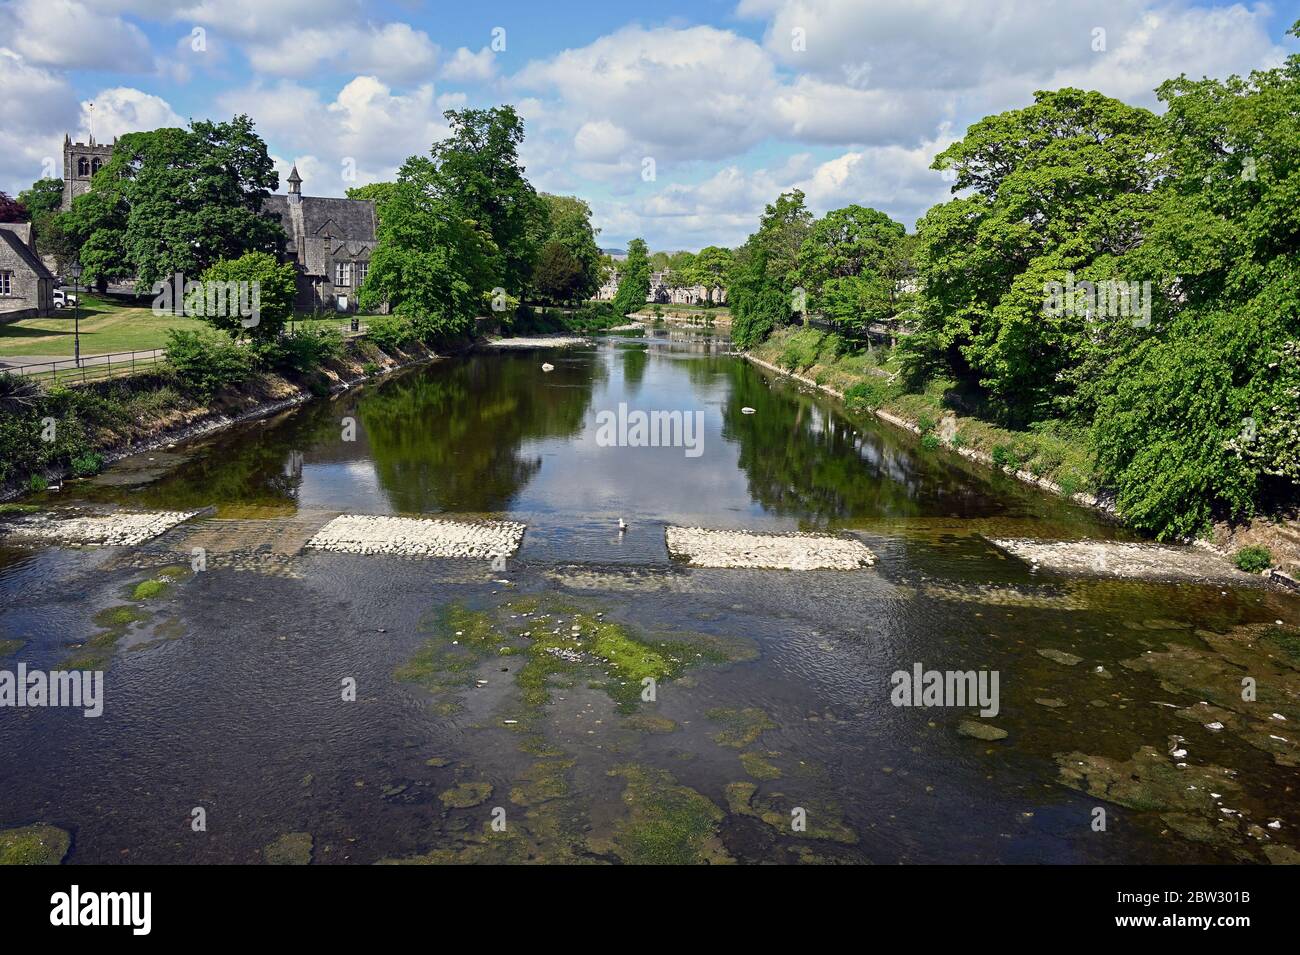 Low water level in the River Kent exposing old ford crossing. Kendal, Cumbria, England, United Kingdom, Europe. Stock Photo